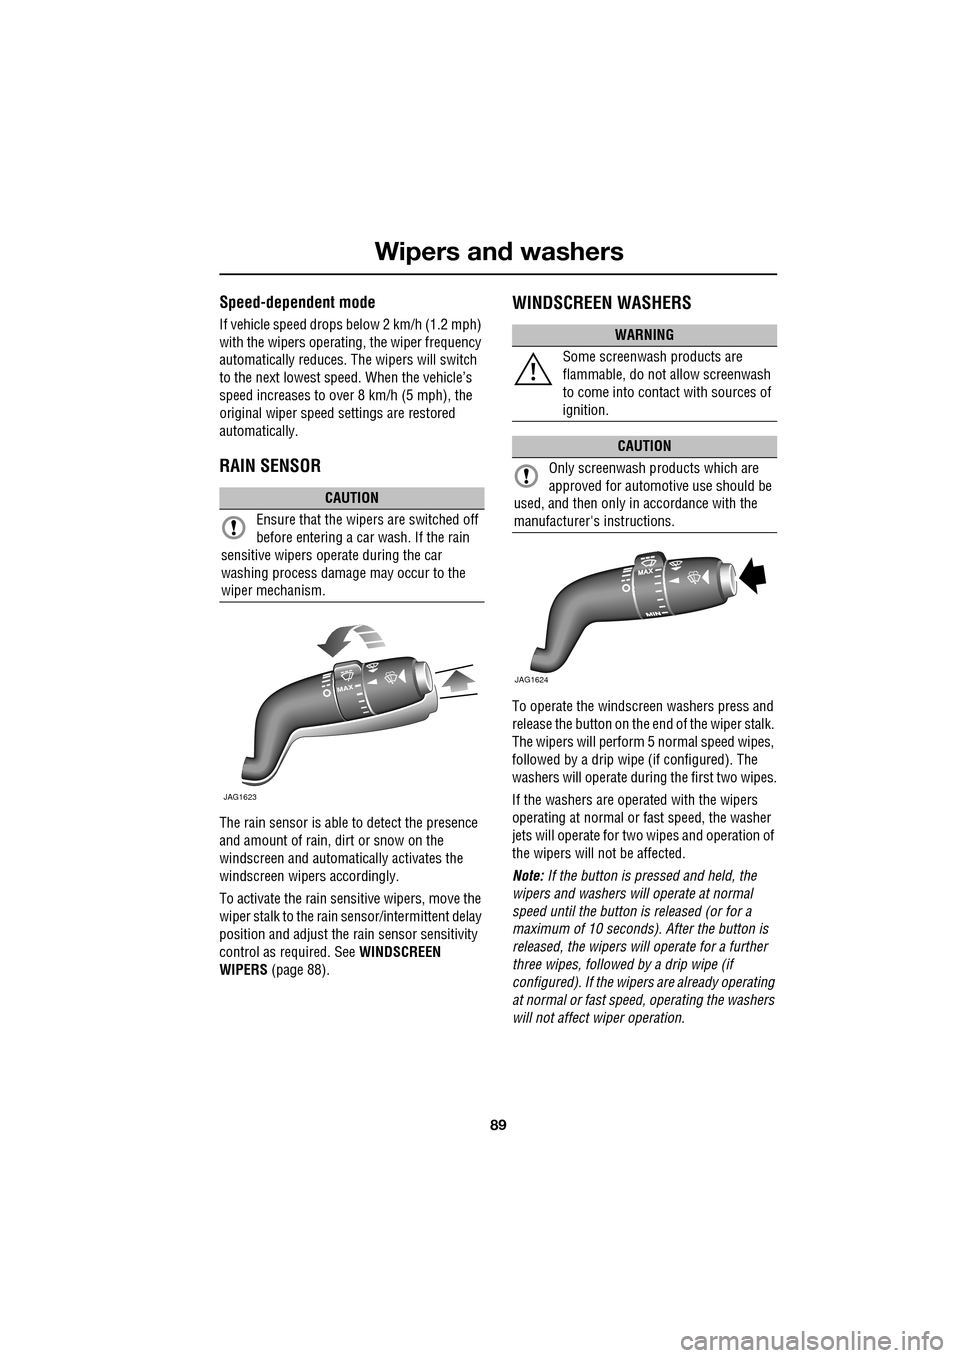 JAGUAR XF 2009 1.G Owners Manual 89
Wipers and washers
               
Speed-dependent mode
If vehicle speed drops below 2 km/h (1.2 mph) 
with the wipers operating, the wiper frequency 
automatically reduces. The wipers will switch 